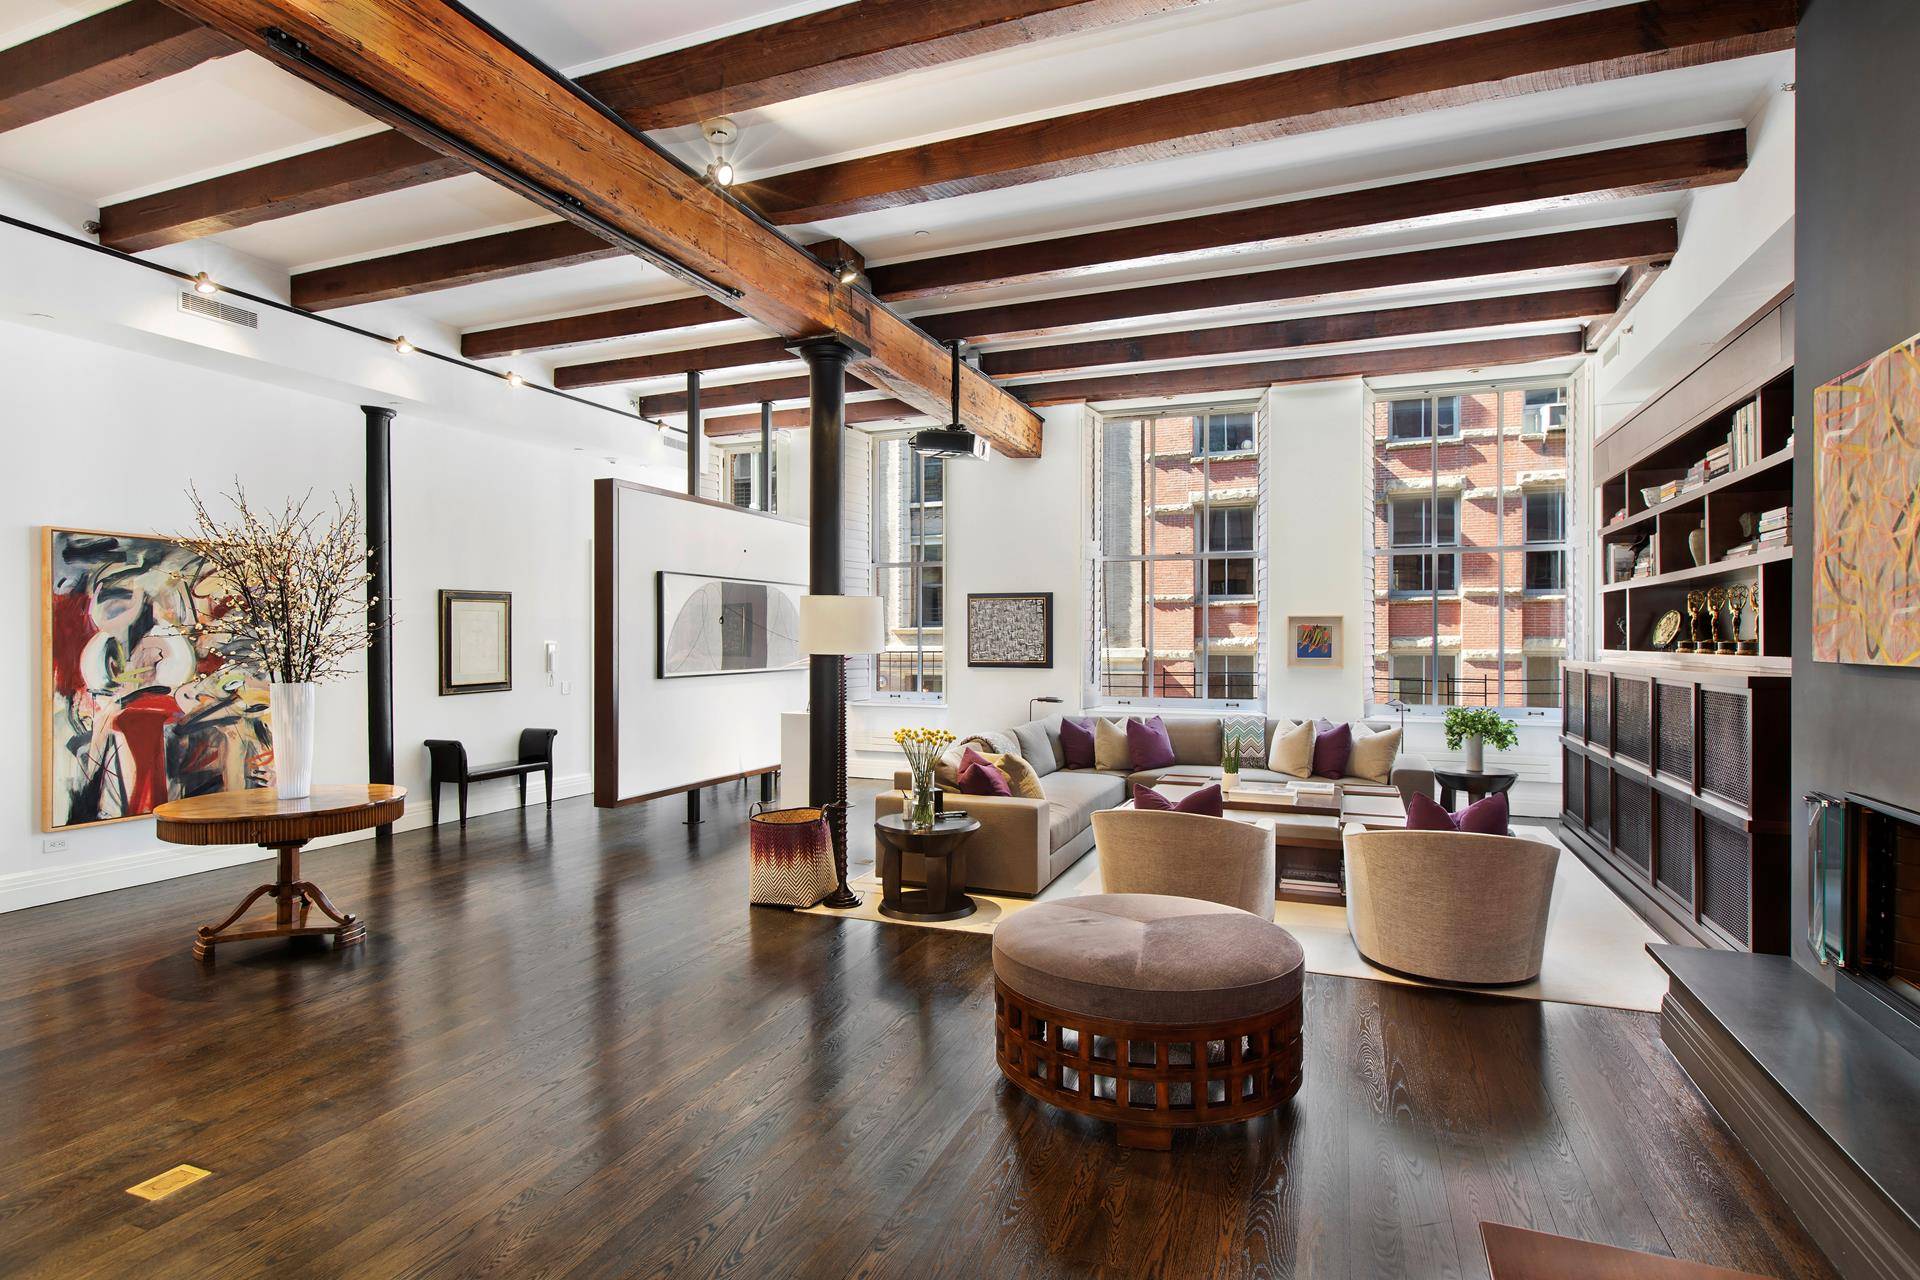 Located on one of Soho's most coveted blocks, residence 2N at 104 Wooster Street is the epitome of classic loft living.